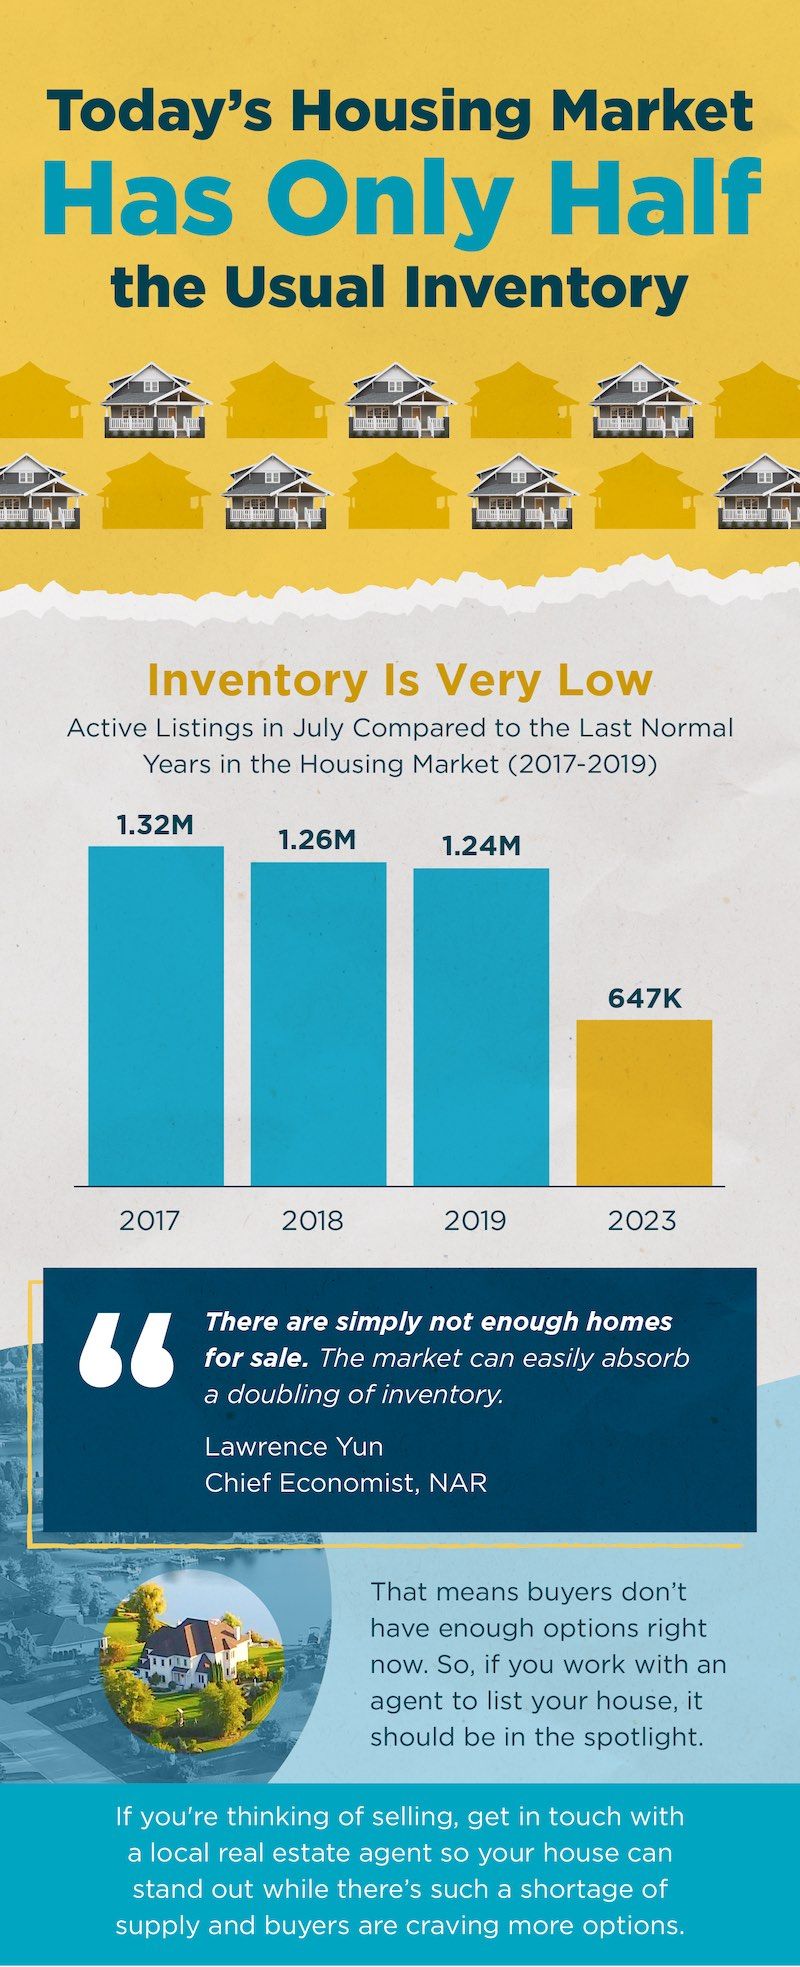 featured image for story, Today’s Housing Market Has Only Half the Usual Inventory